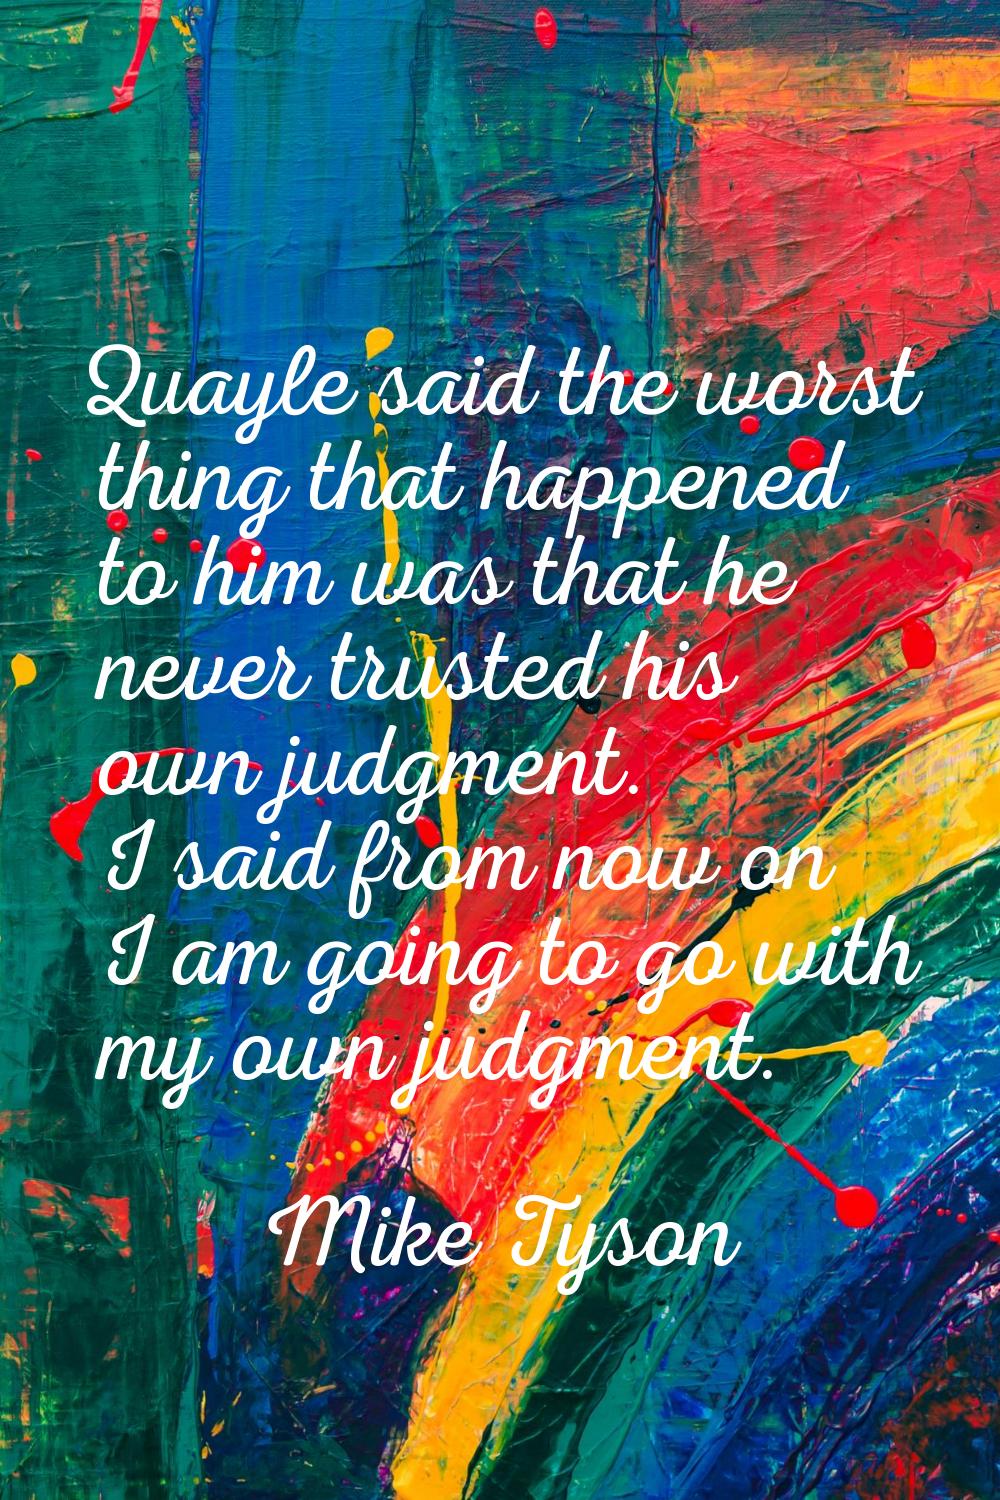 Quayle said the worst thing that happened to him was that he never trusted his own judgment. I said